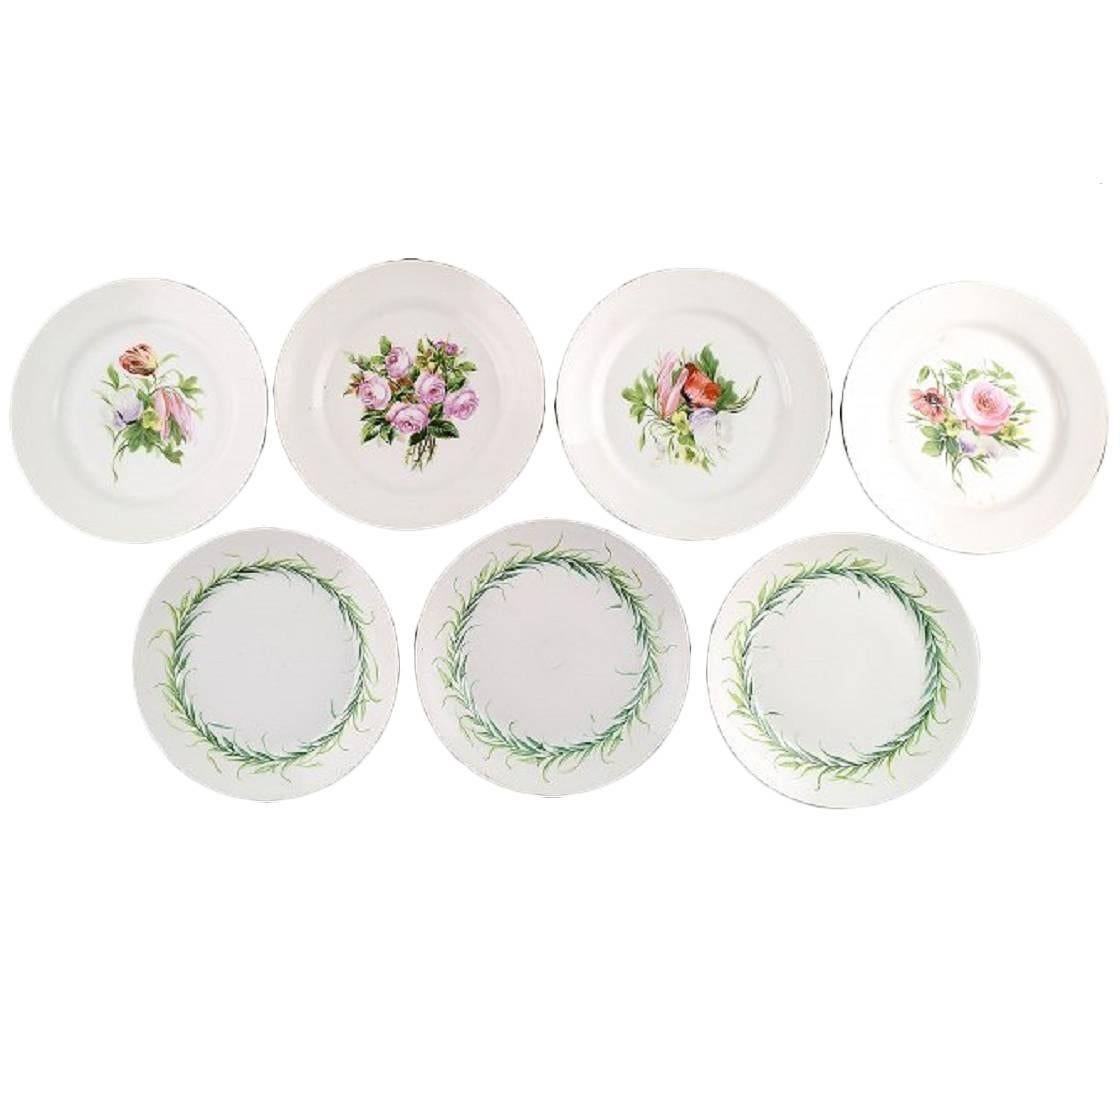 Seven Antique B&G Bing & Grondahl Plates Decorated with Flowers, circa 1870 For Sale